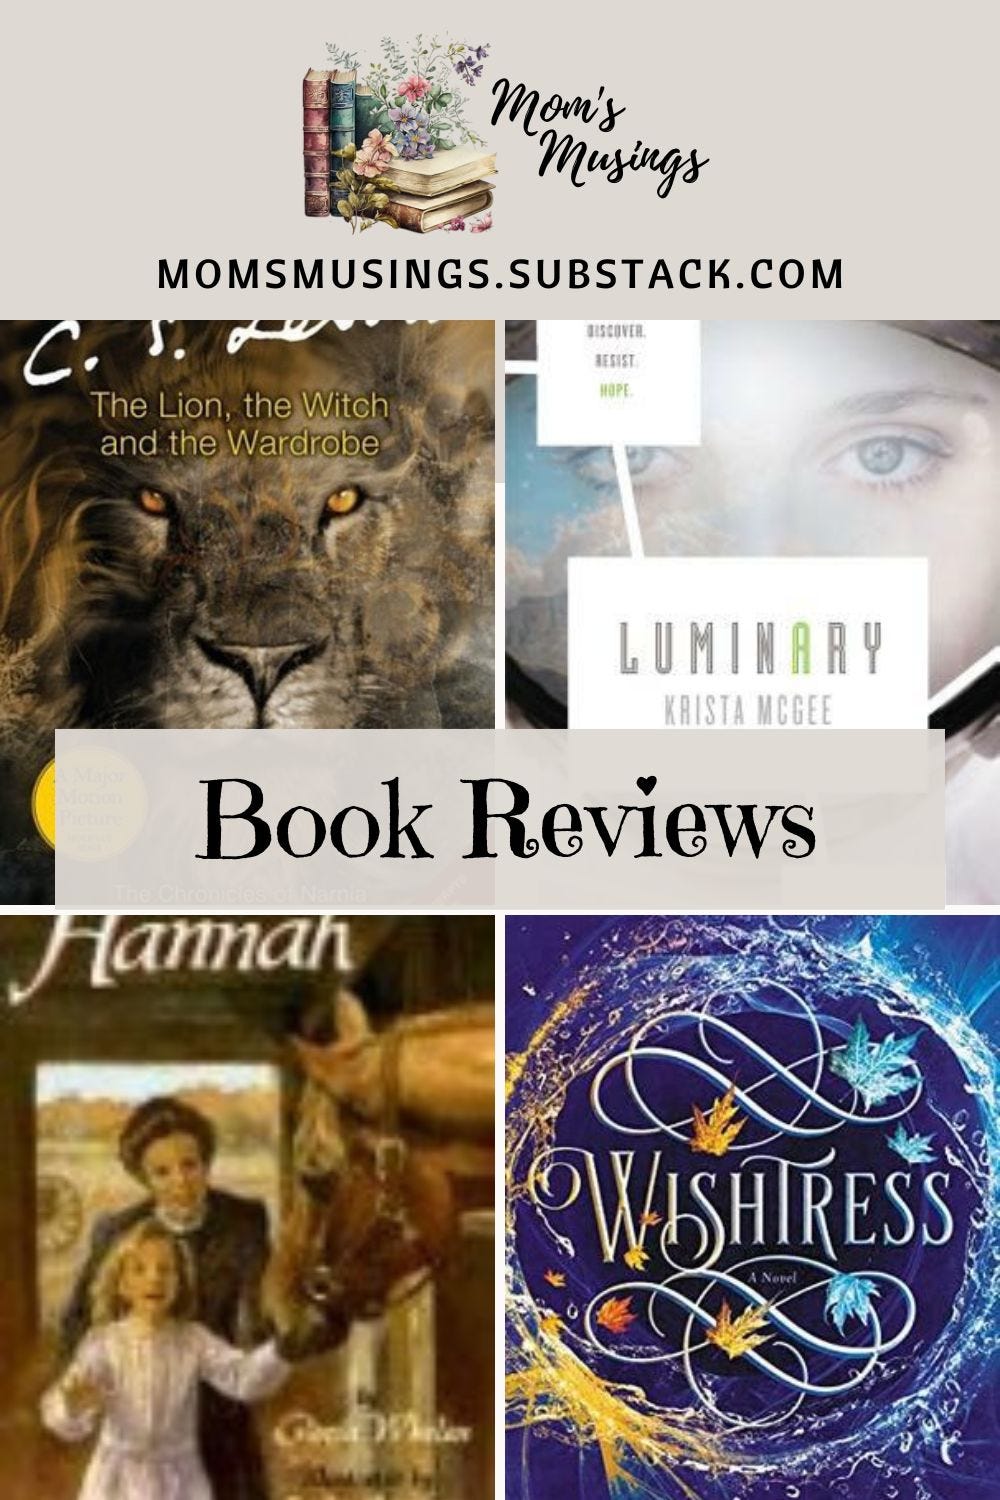 pinnable image of book reviews of the lion the witch and the wardrobe, luminary, hannah, and wishtress